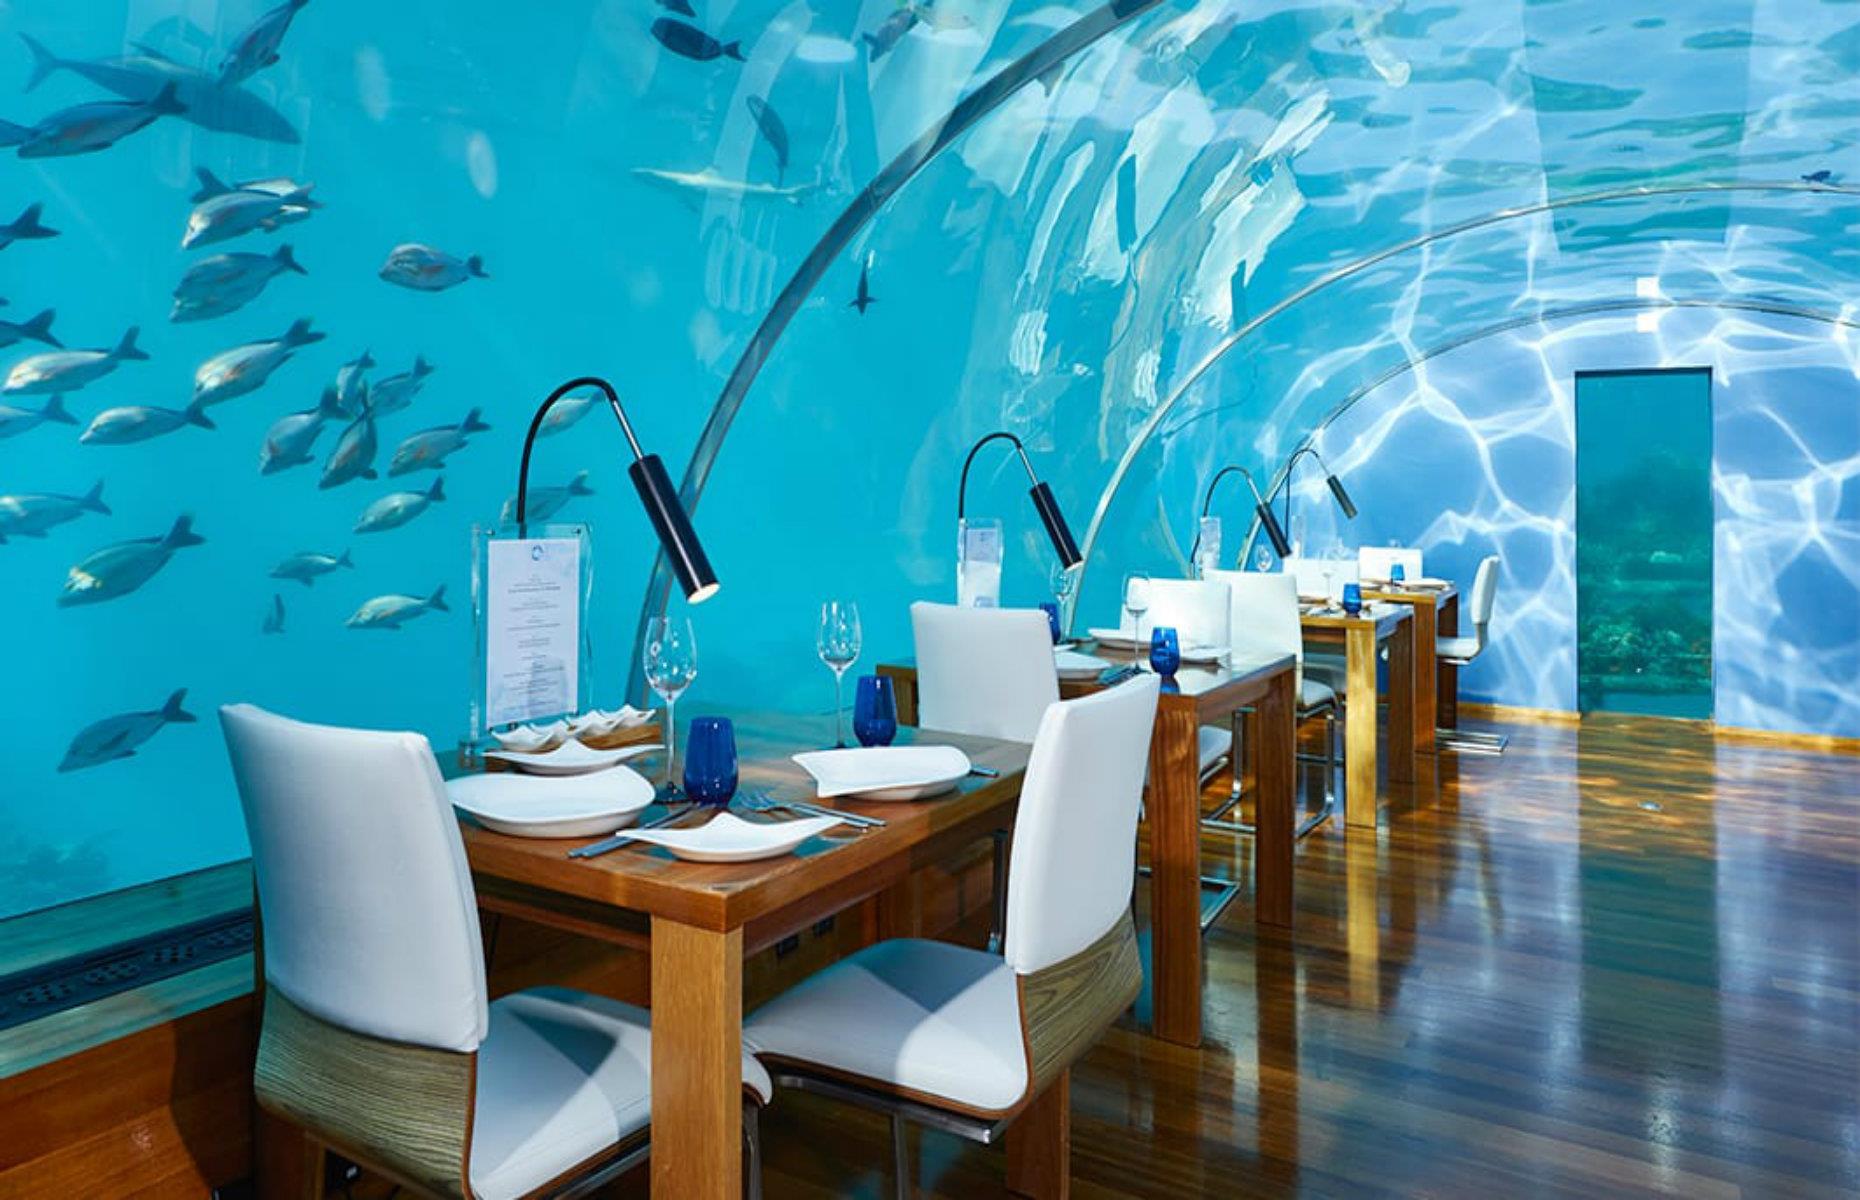 <p>As well as its exclusive undersea suite, the Conrad resort also lays claim to having the world’s first all-glass undersea restaurant. The small but spectacular Ithaa Undersea Restaurant (pictured) opened in 2005 and lies 16 feet (5m) below the ocean's surface. It serves up sensational views of the surrounding corals and ocean life to 14 diners along with a menu of contemporary European cuisine and fine wines.</p>  <p><strong><a href="https://www.loveexploring.com/galleries/100304/40-places-you-wont-believe-are-on-earth">Check out these jaw-dropping places you won't believe are on Earth</a></strong></p>